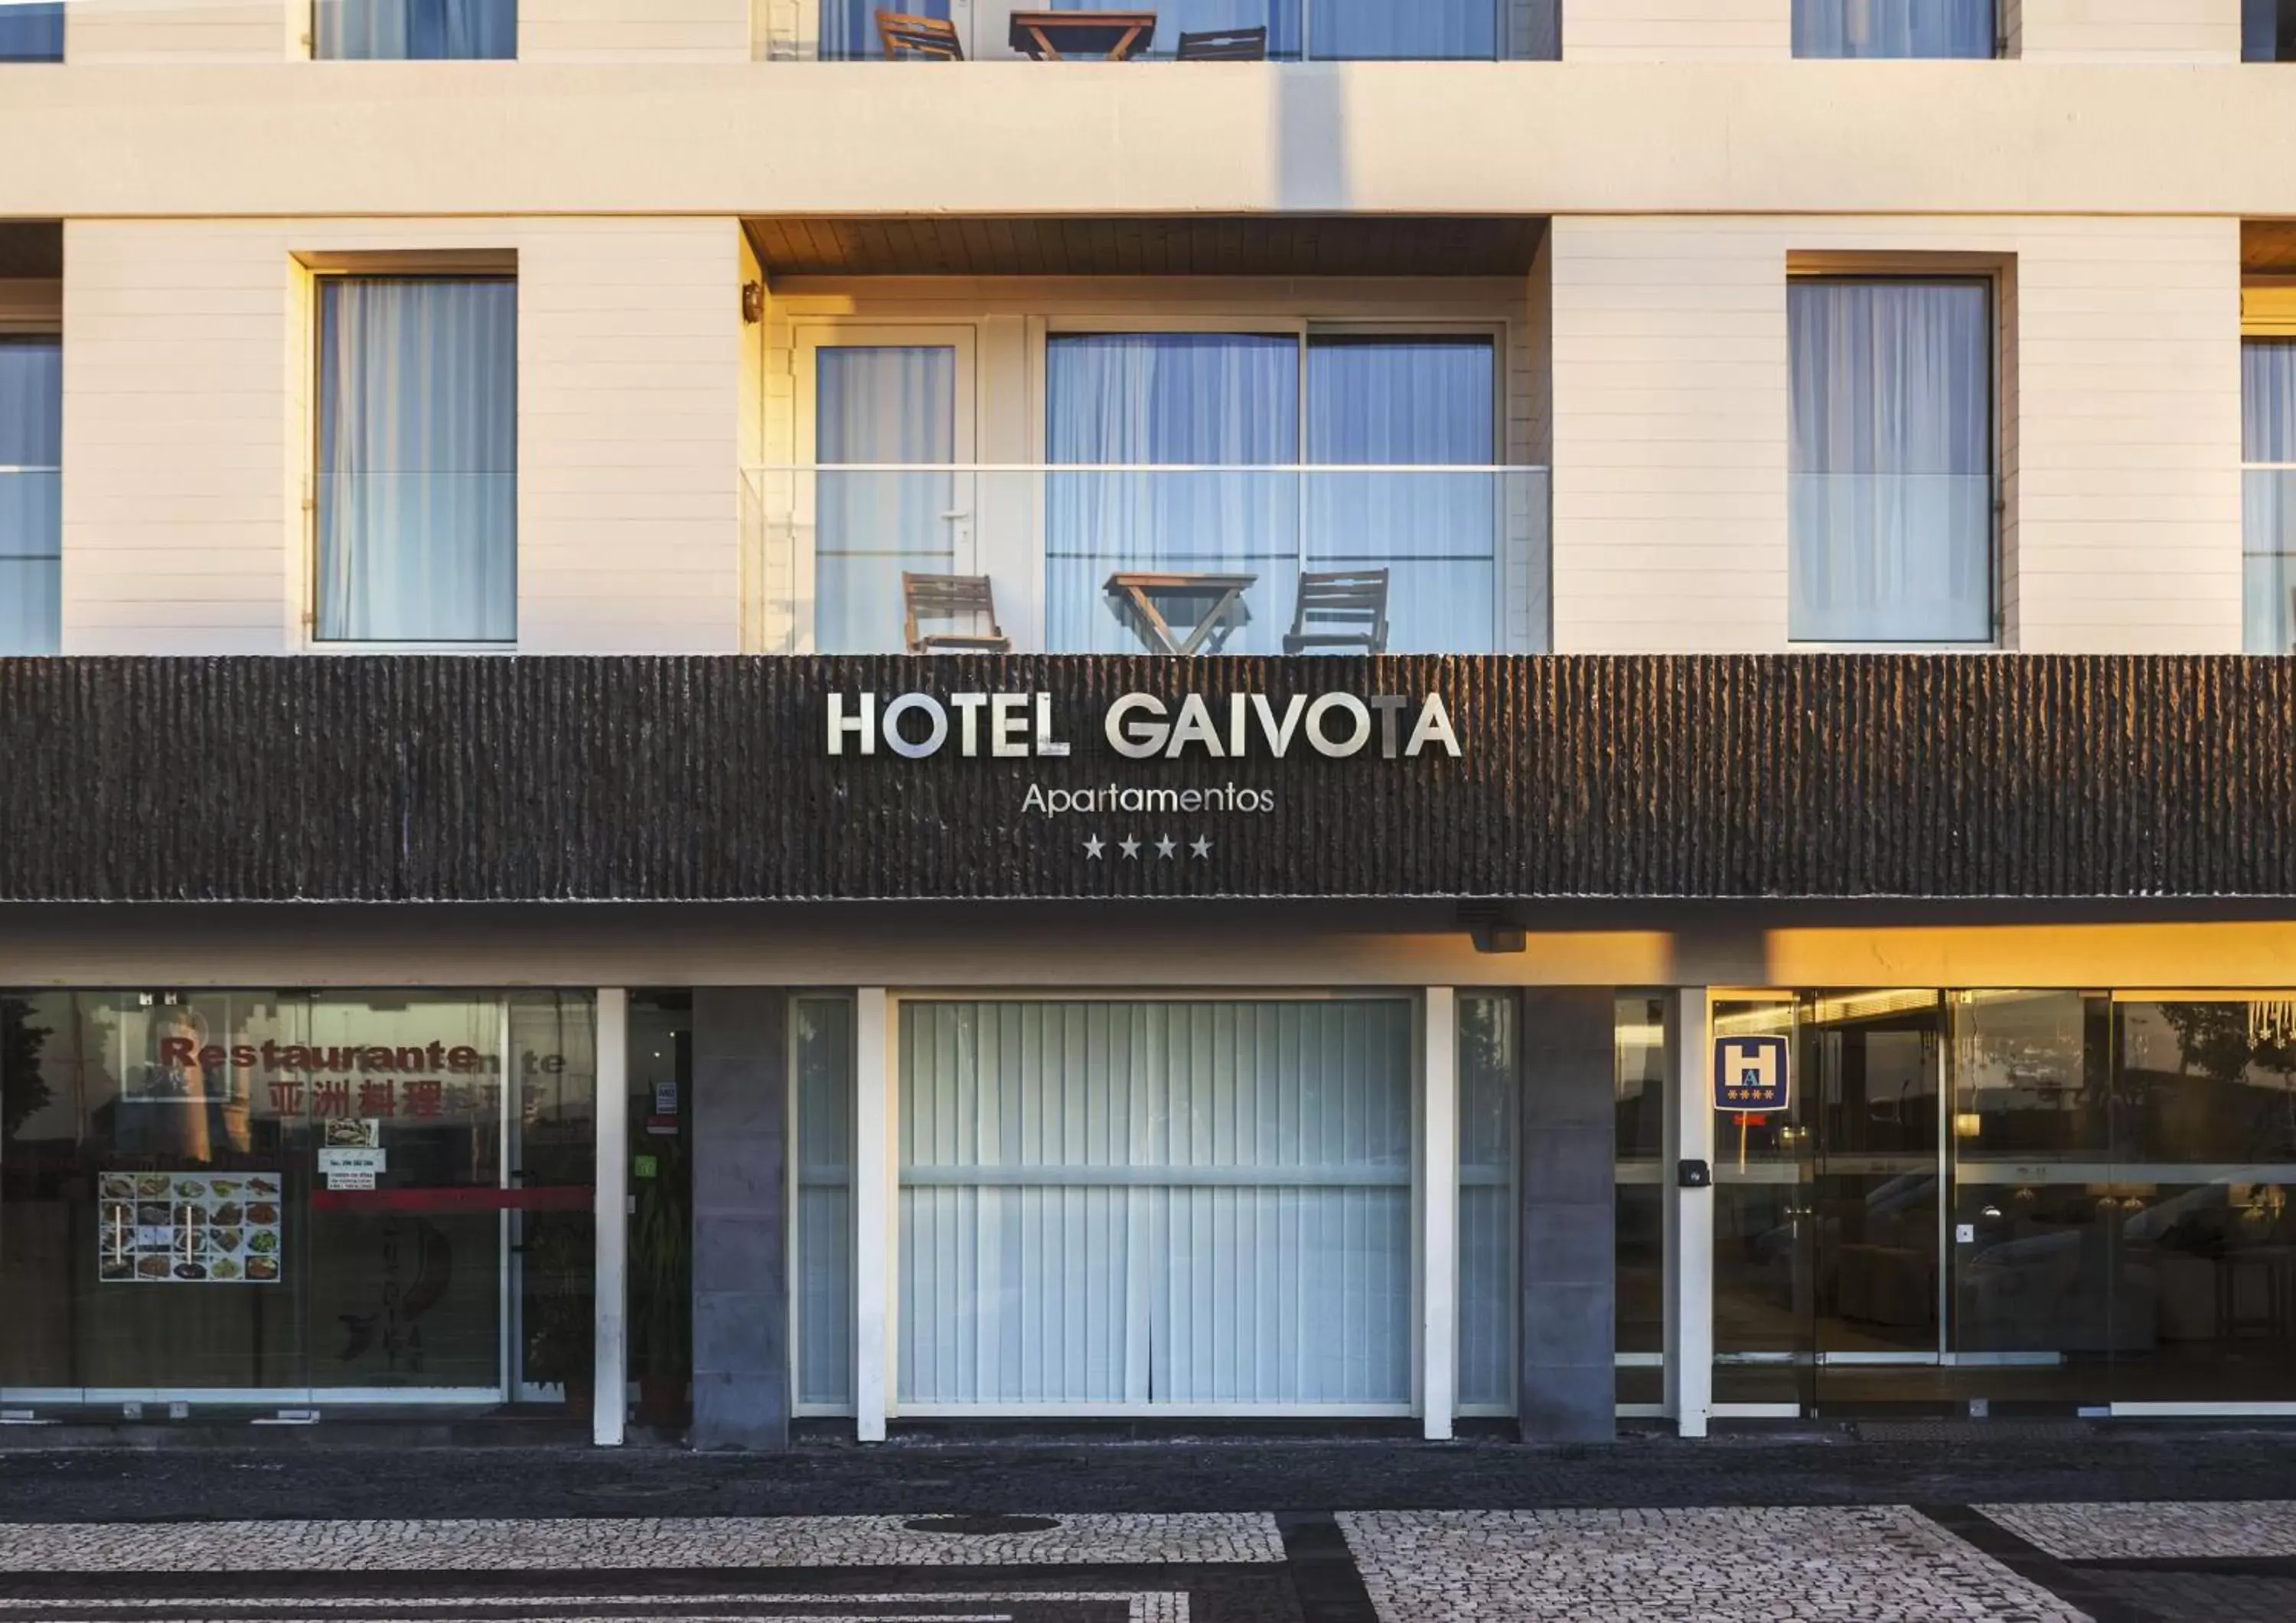 Property building in Hotel Gaivota Azores